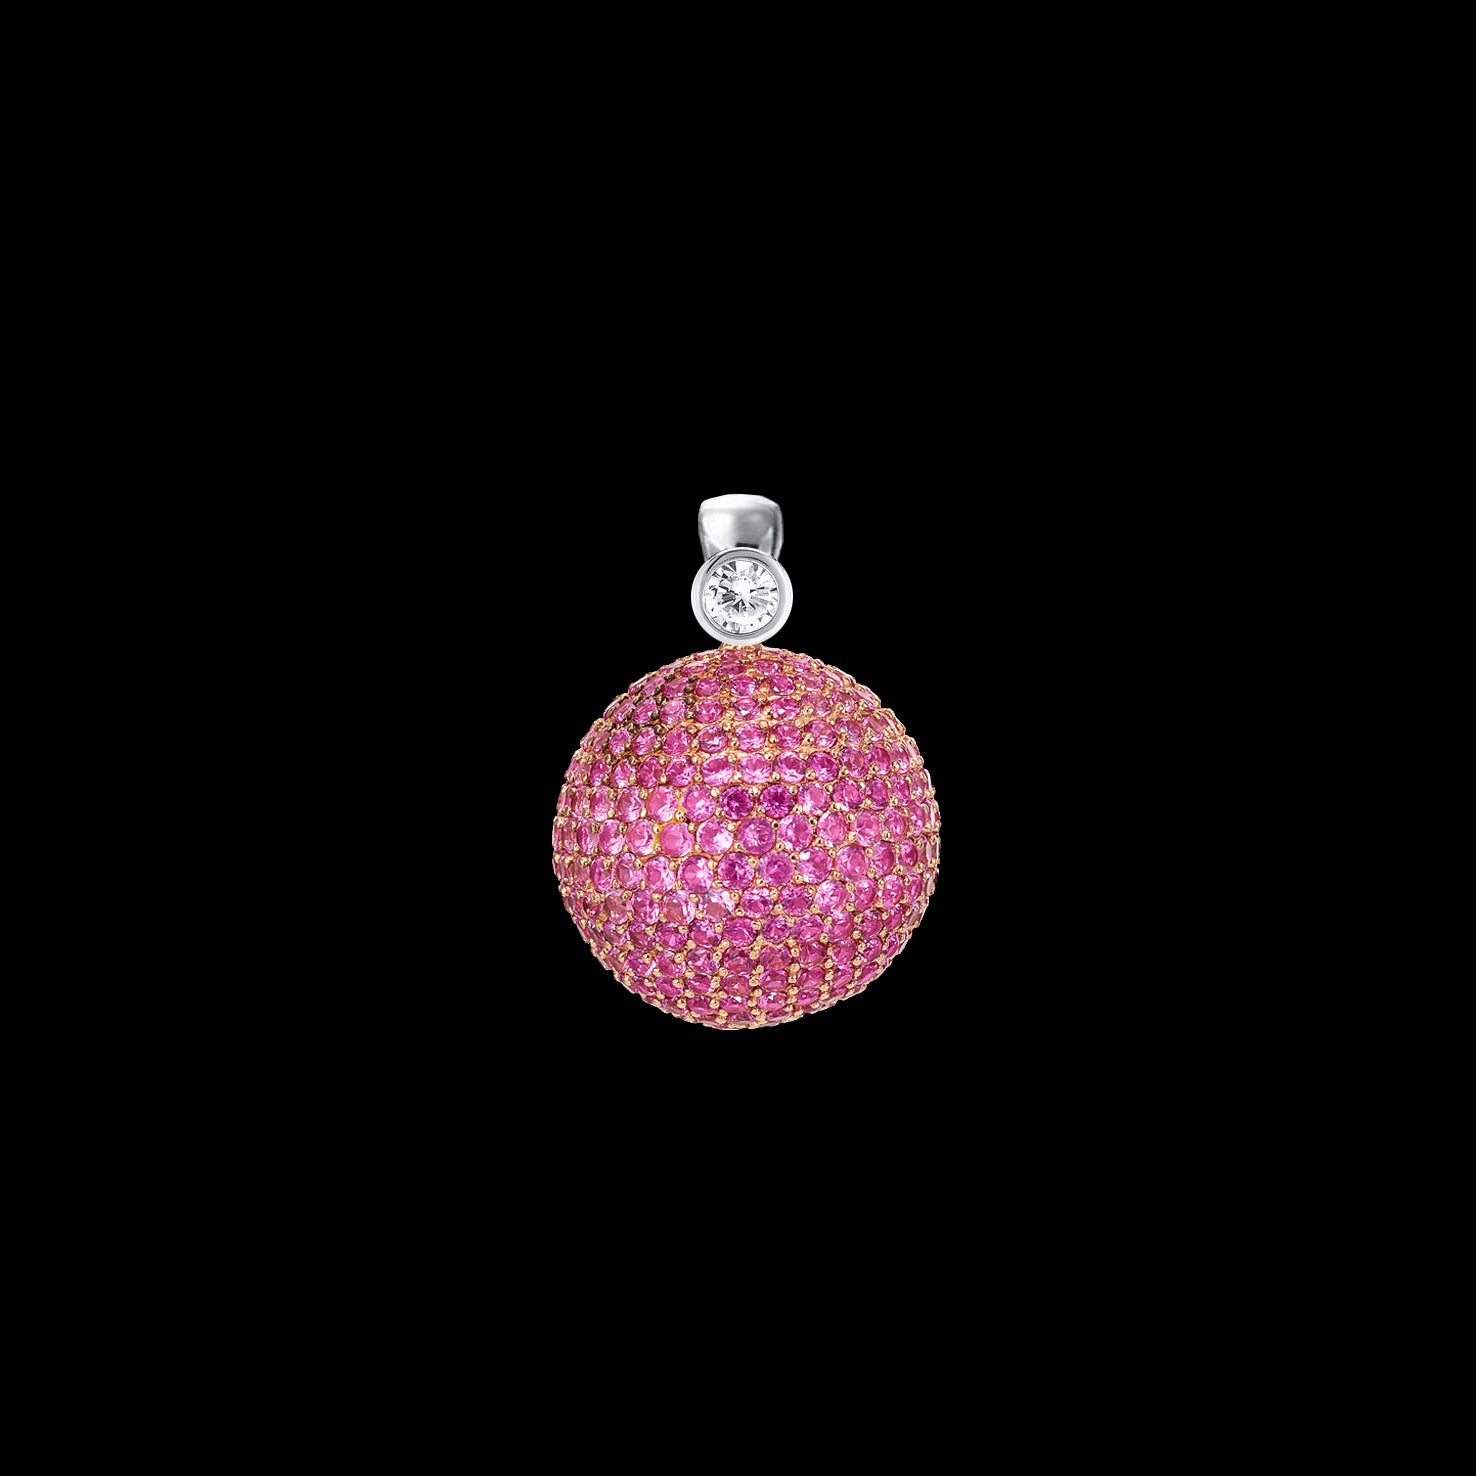 Tutti Frutti Rose Bauble Pendant, Necklace, Anabela Chan Joaillerie - Fine jewelry with laboratory grown and created gemstones hand-crafted in the United Kingdom. Anabela Chan Joaillerie is the first fine jewellery brand in the world to champion laboratory-grown and created gemstones with high jewellery design, artisanal craftsmanship and a focus on ethical and sustainable innovations.